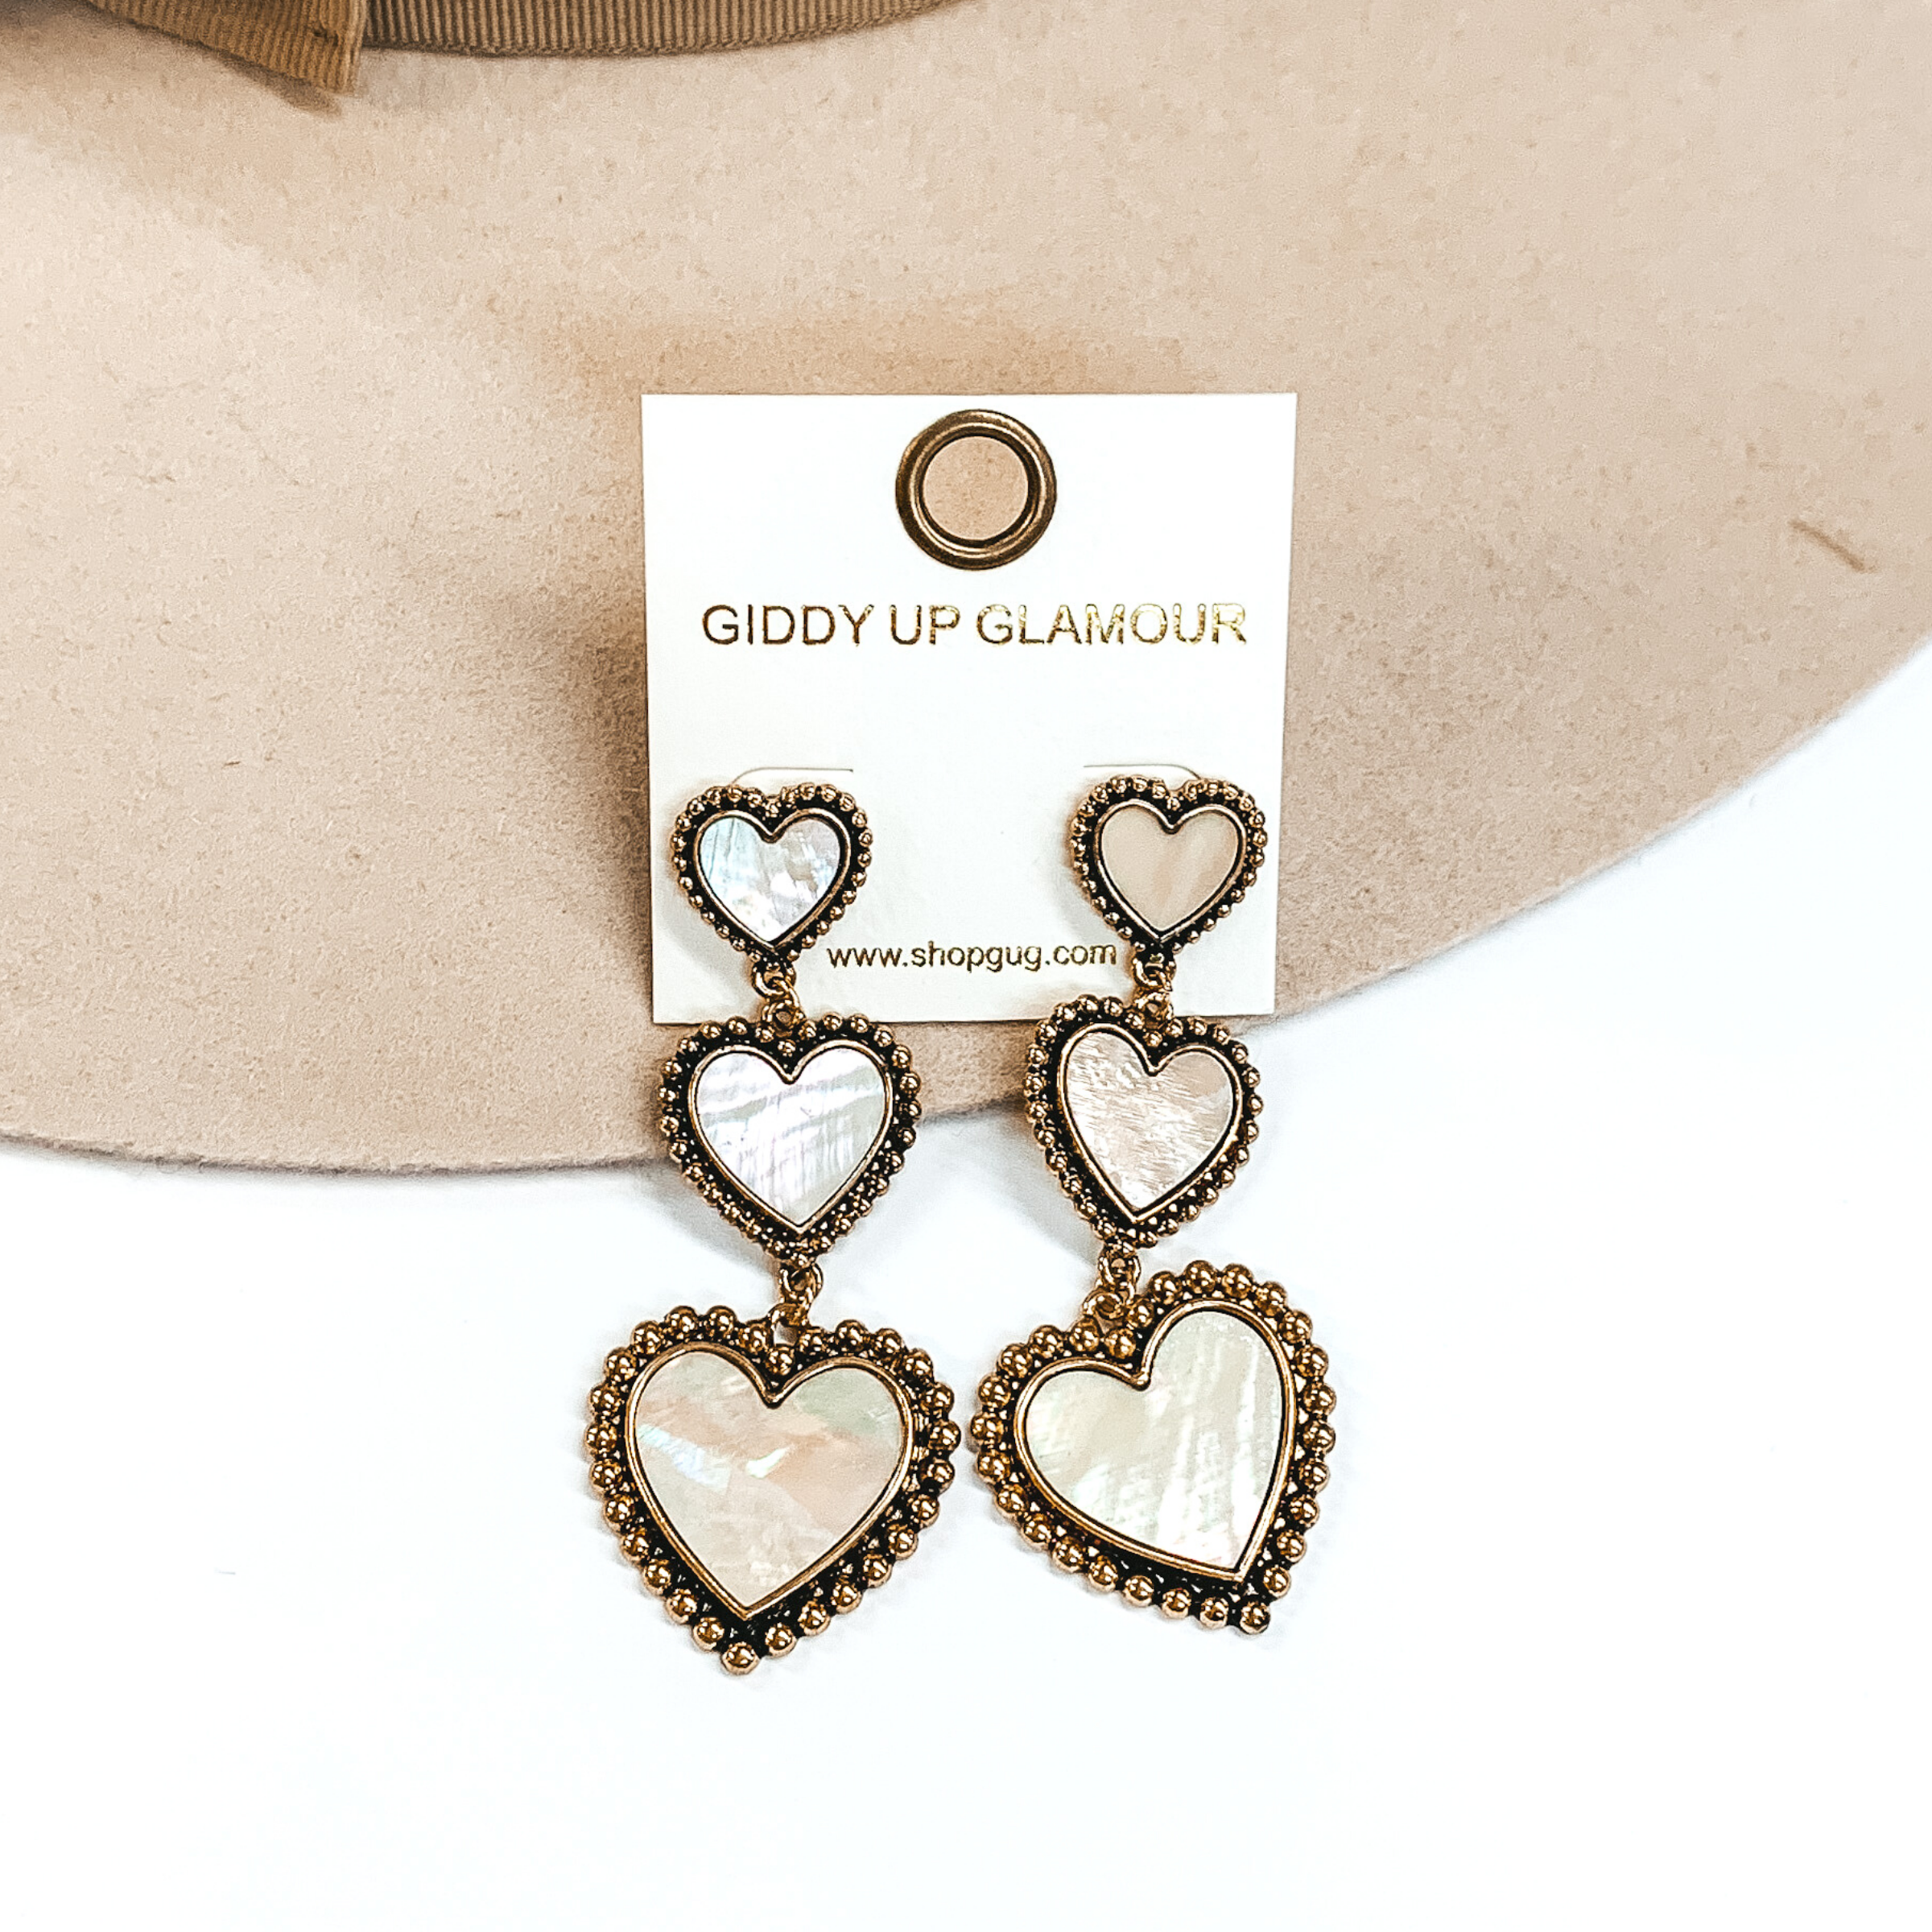 Three tiered heart drop earrings with hearts going from smallest to largest. These earrings have a gold outline with an ivory shell inlay. These earrings are pictured on a white and beige background. 